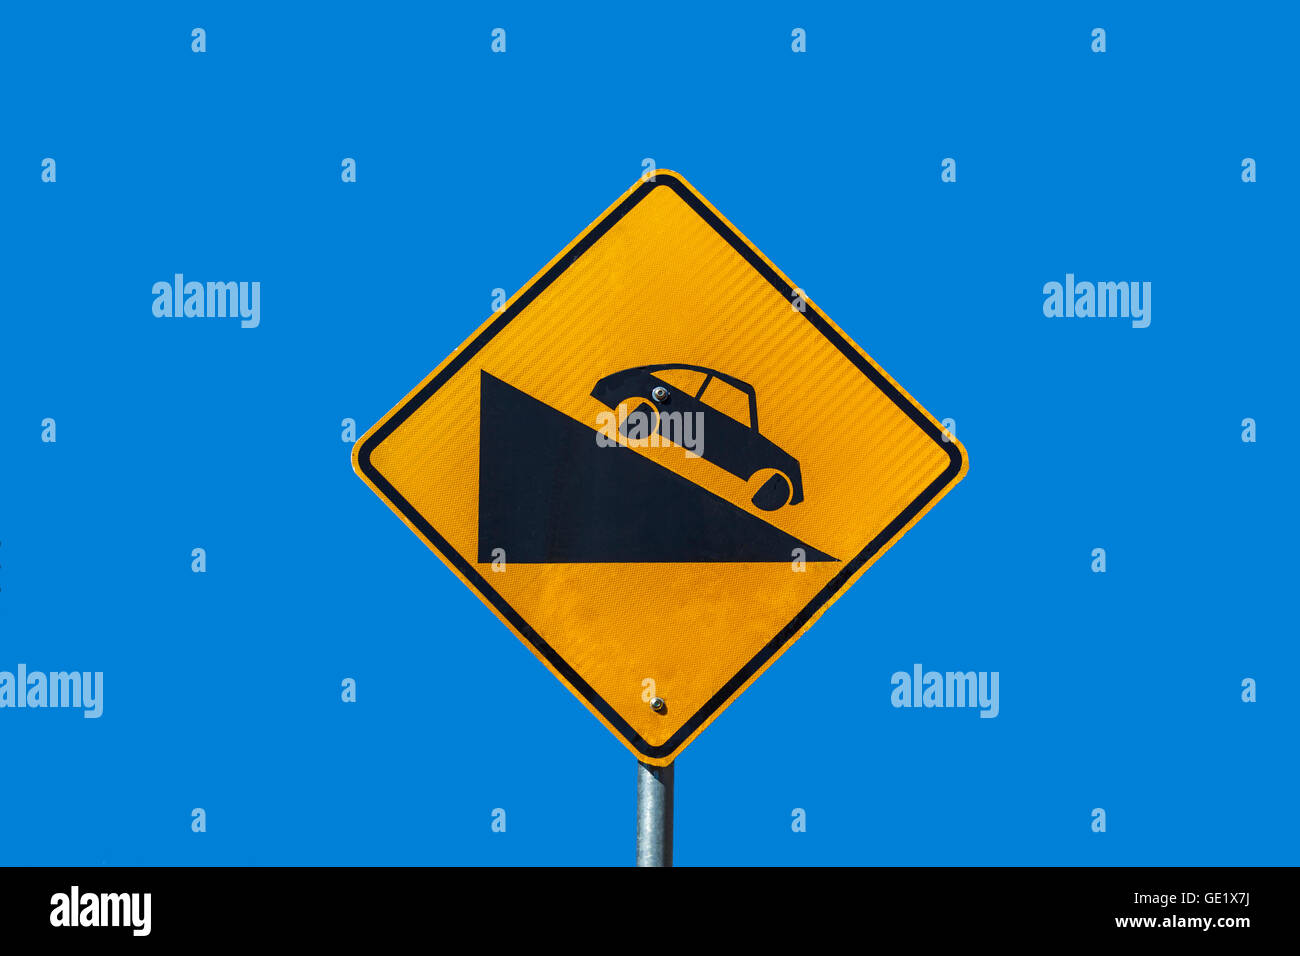 Road sign warning of steep hill ahead Stock Photo